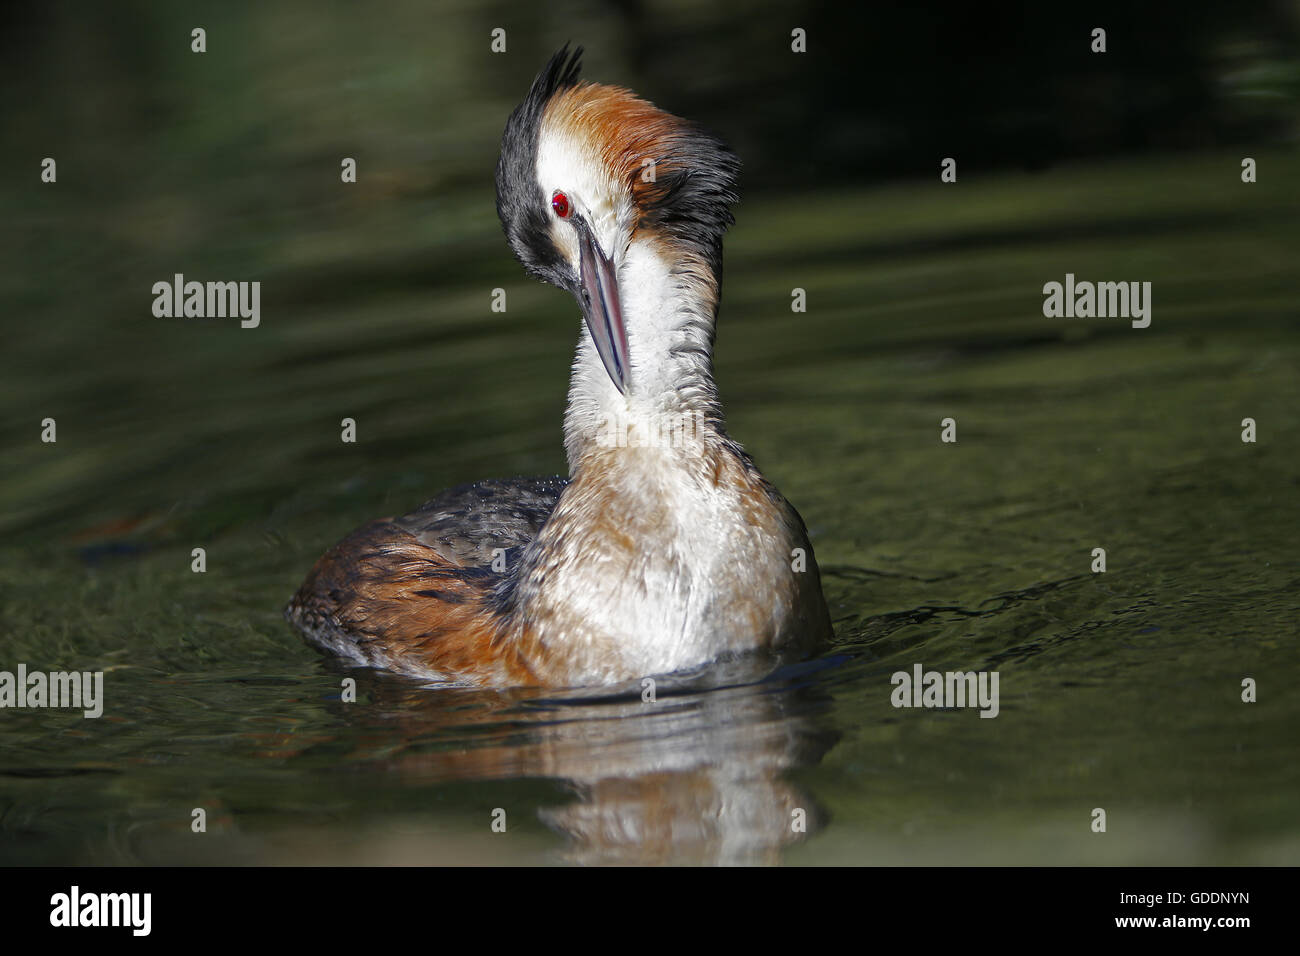 Great Crested Grebe, podiceps cristatus, Adult grooming, Pyrenees in the South of France Stock Photo